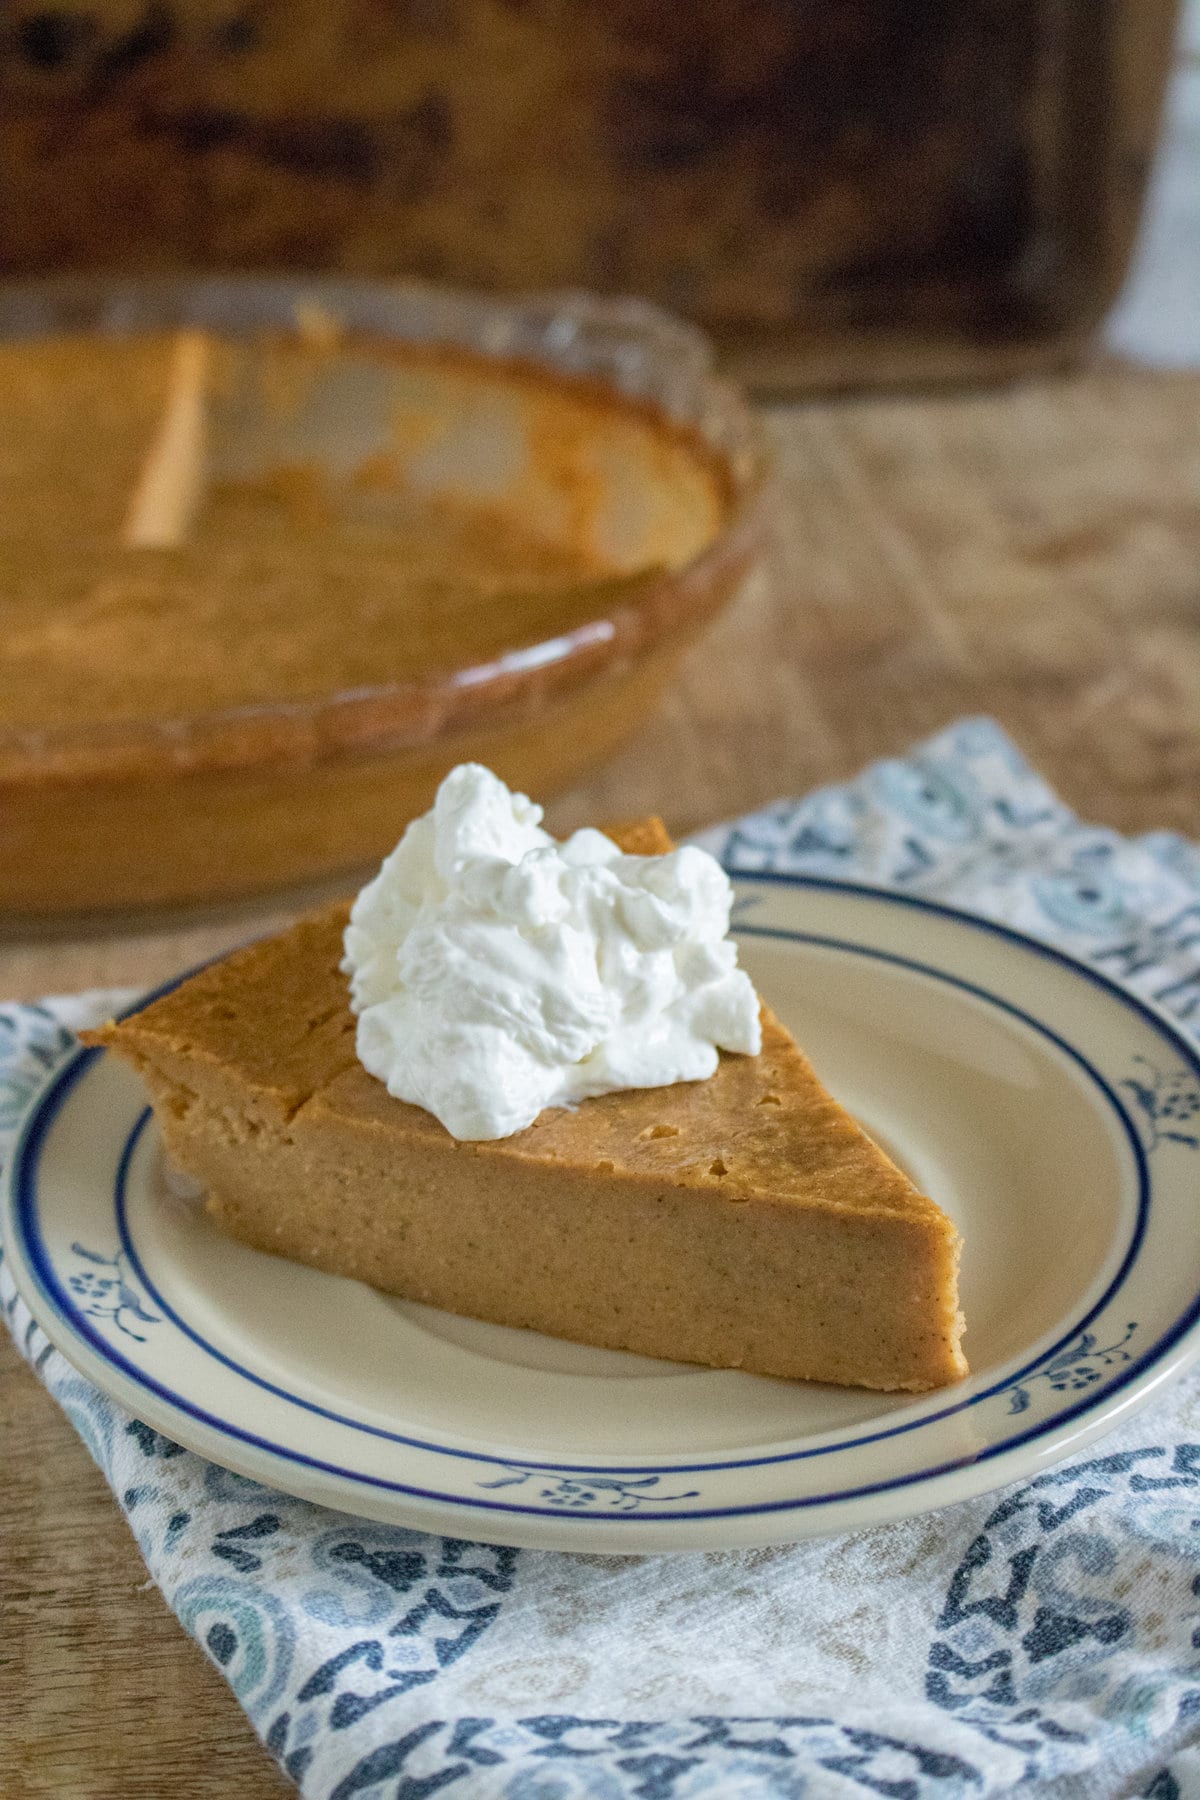 A slice of Crustless Pumpkin Pie topped with whipped cream on a plate, next to the rest of the pie on a wooden table.